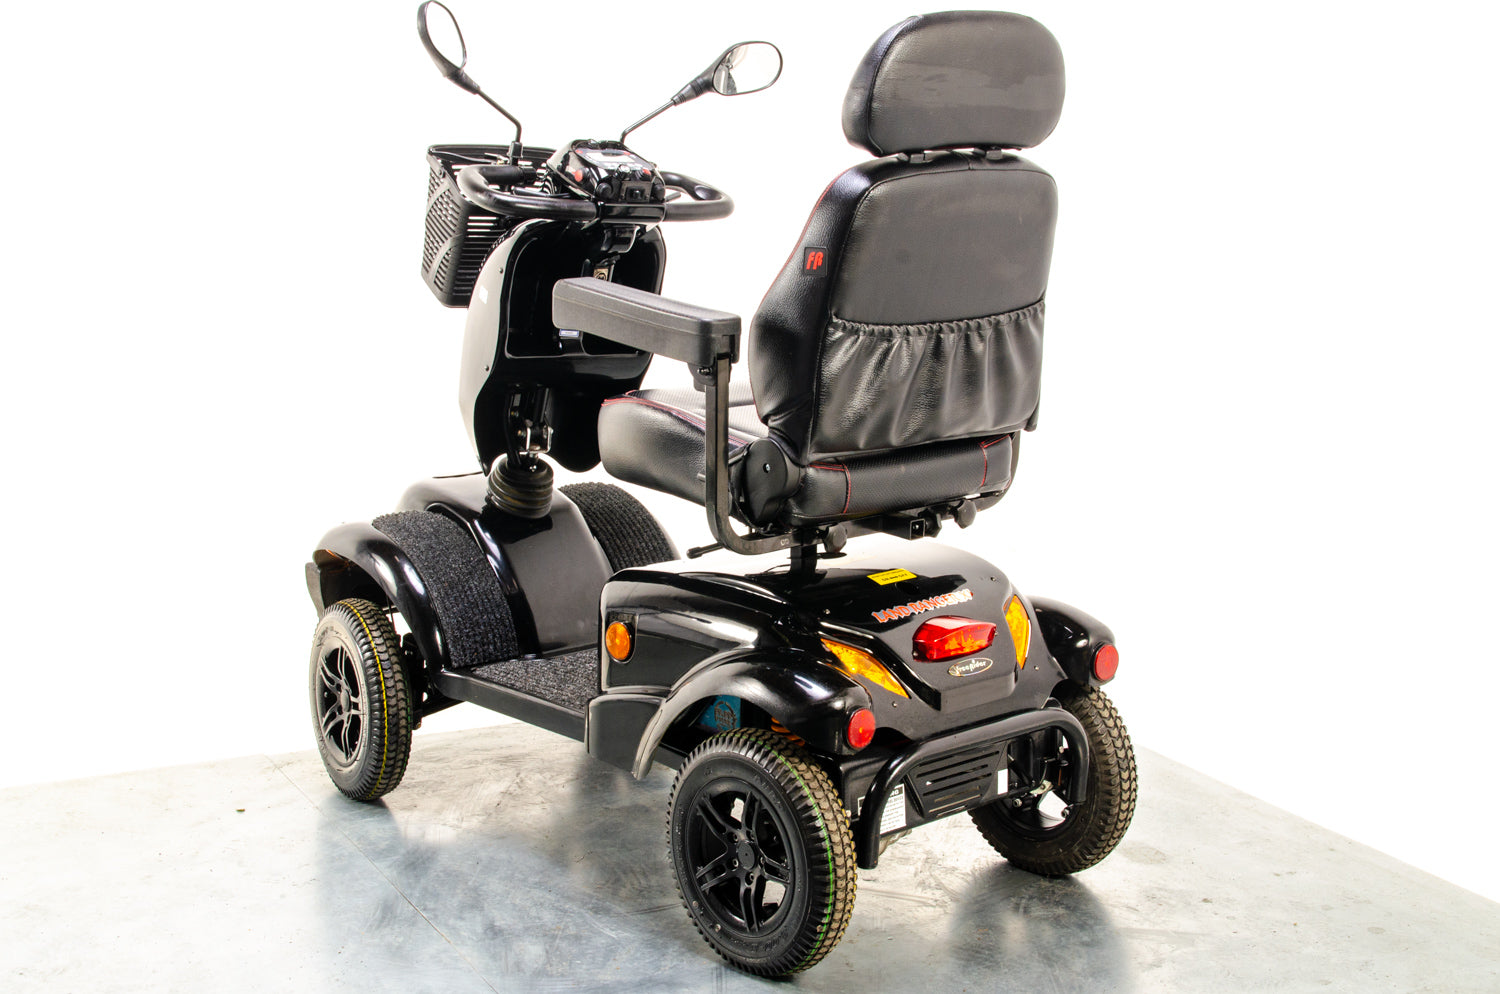 Freerider Landranger XL8 8mph Used Mobility Scooter All-Terrain Off-Road Road Legal Large 13275